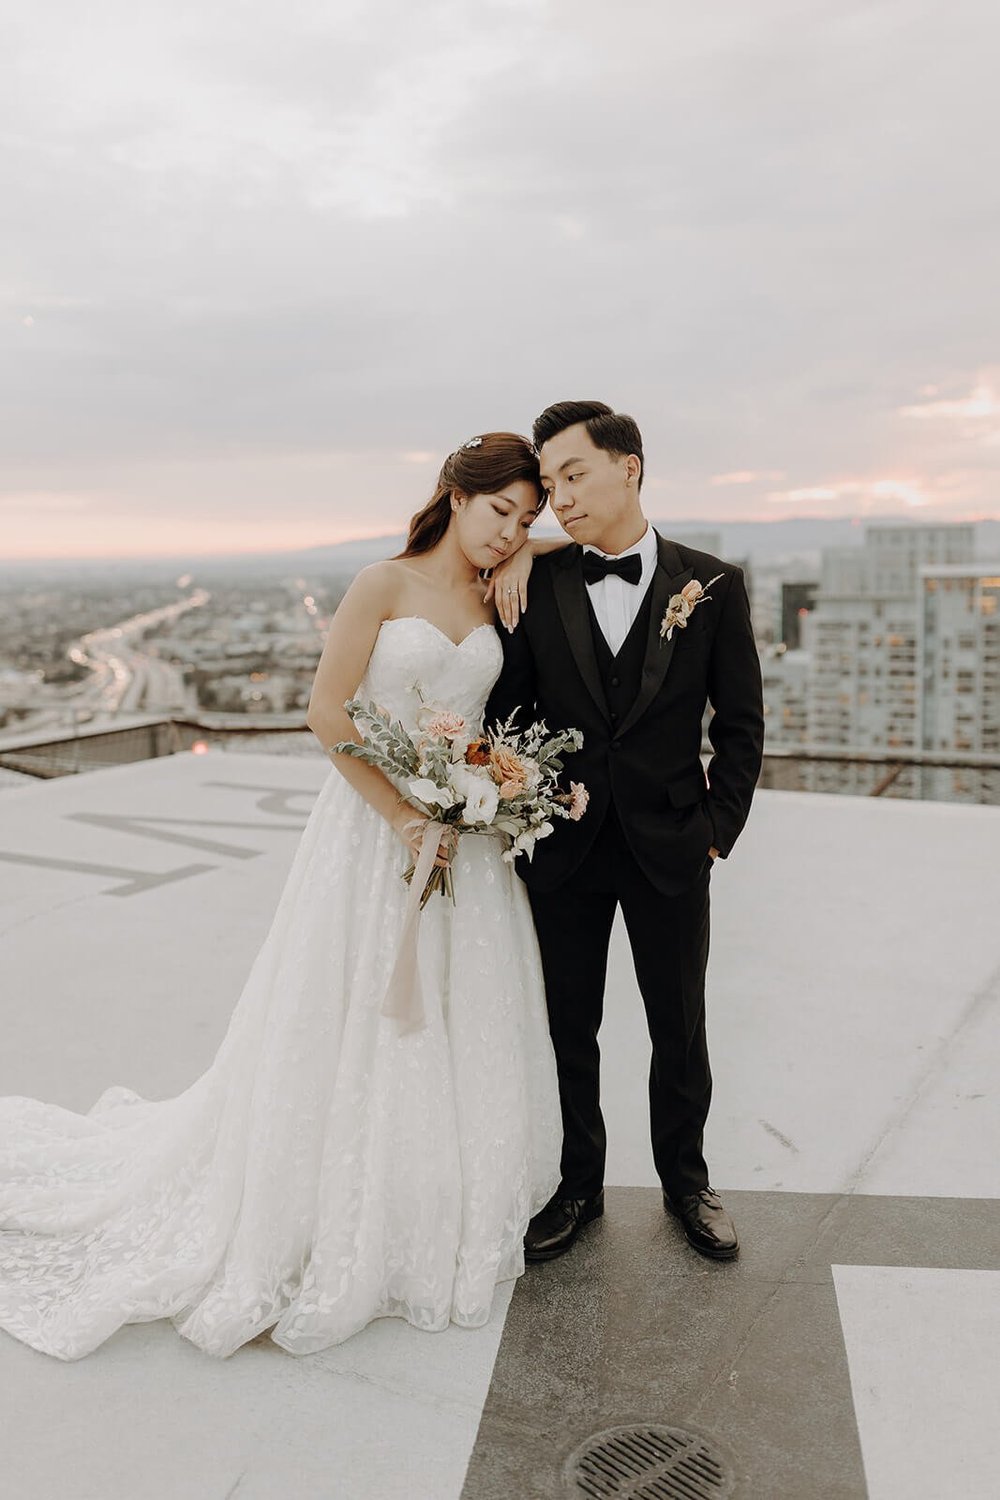 Sunset couple portraits at city wedding in Los Angeles